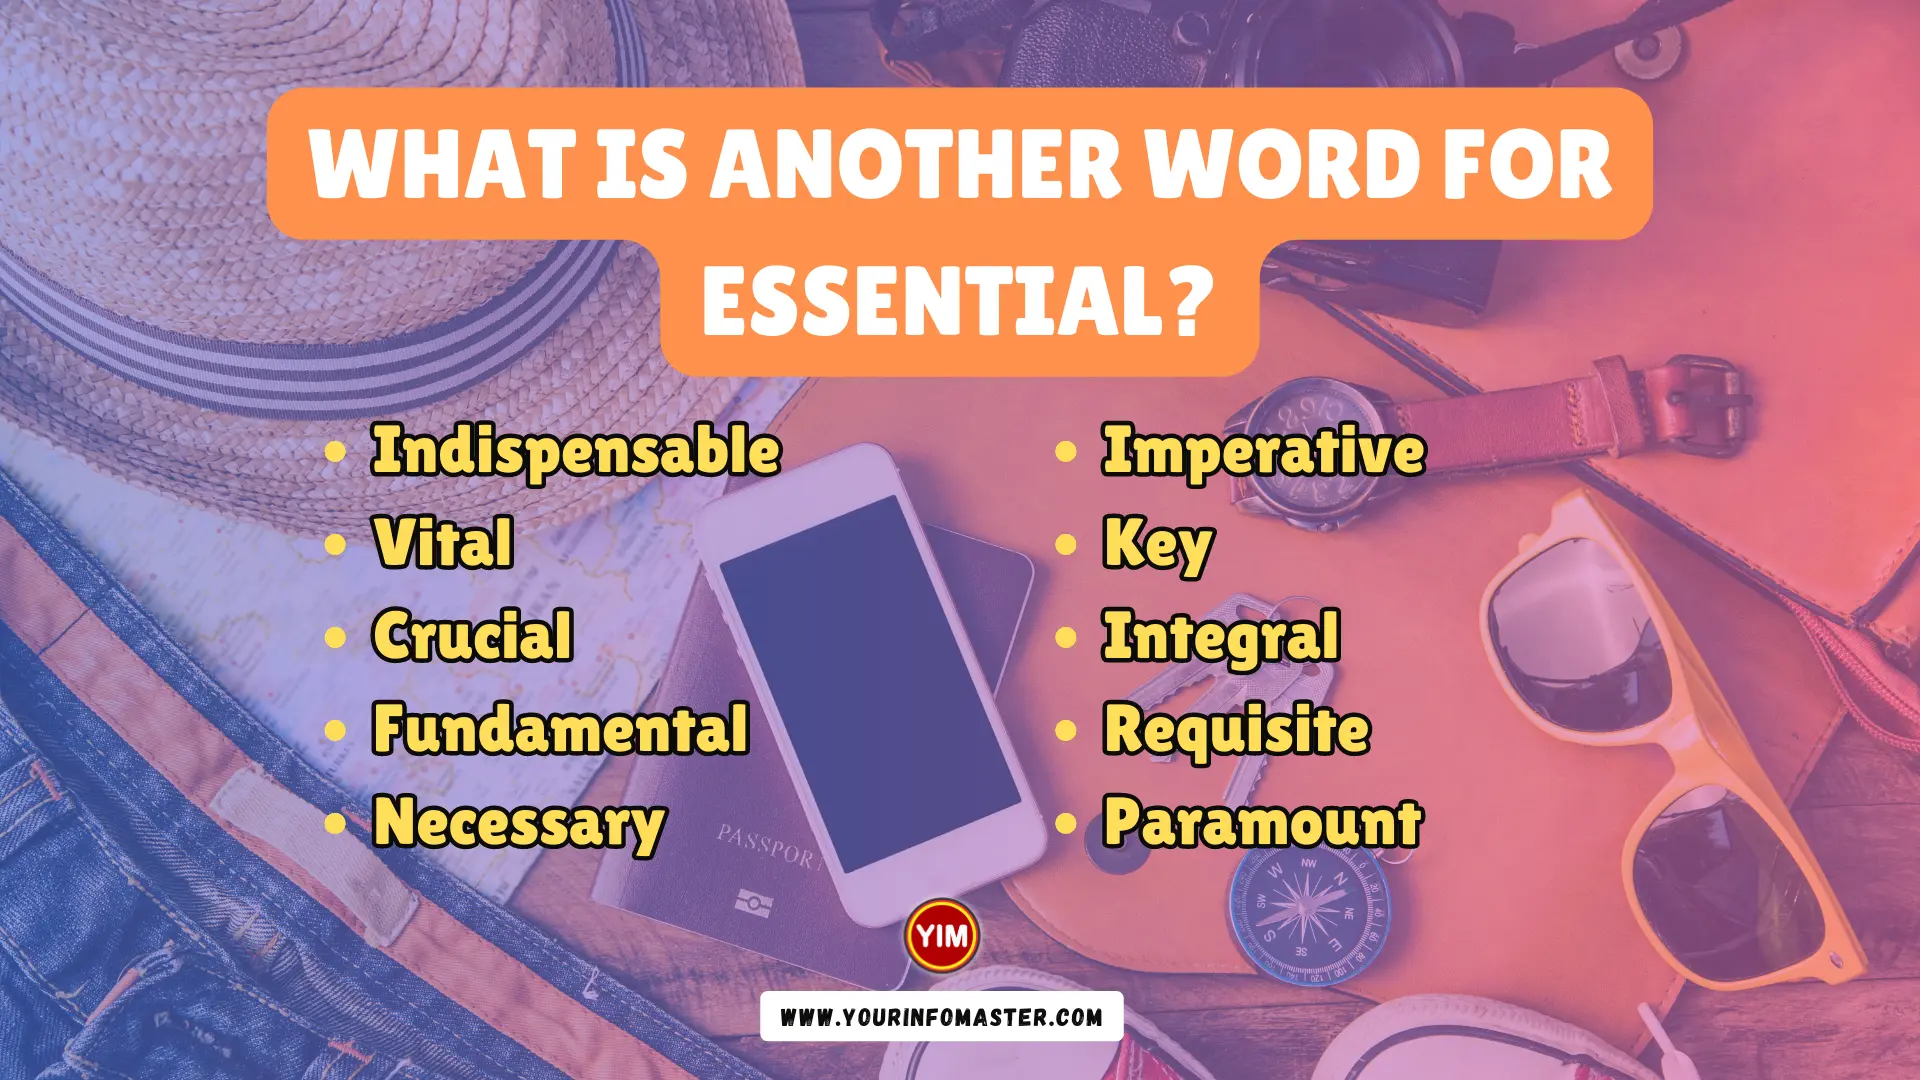 What is another word for Essential